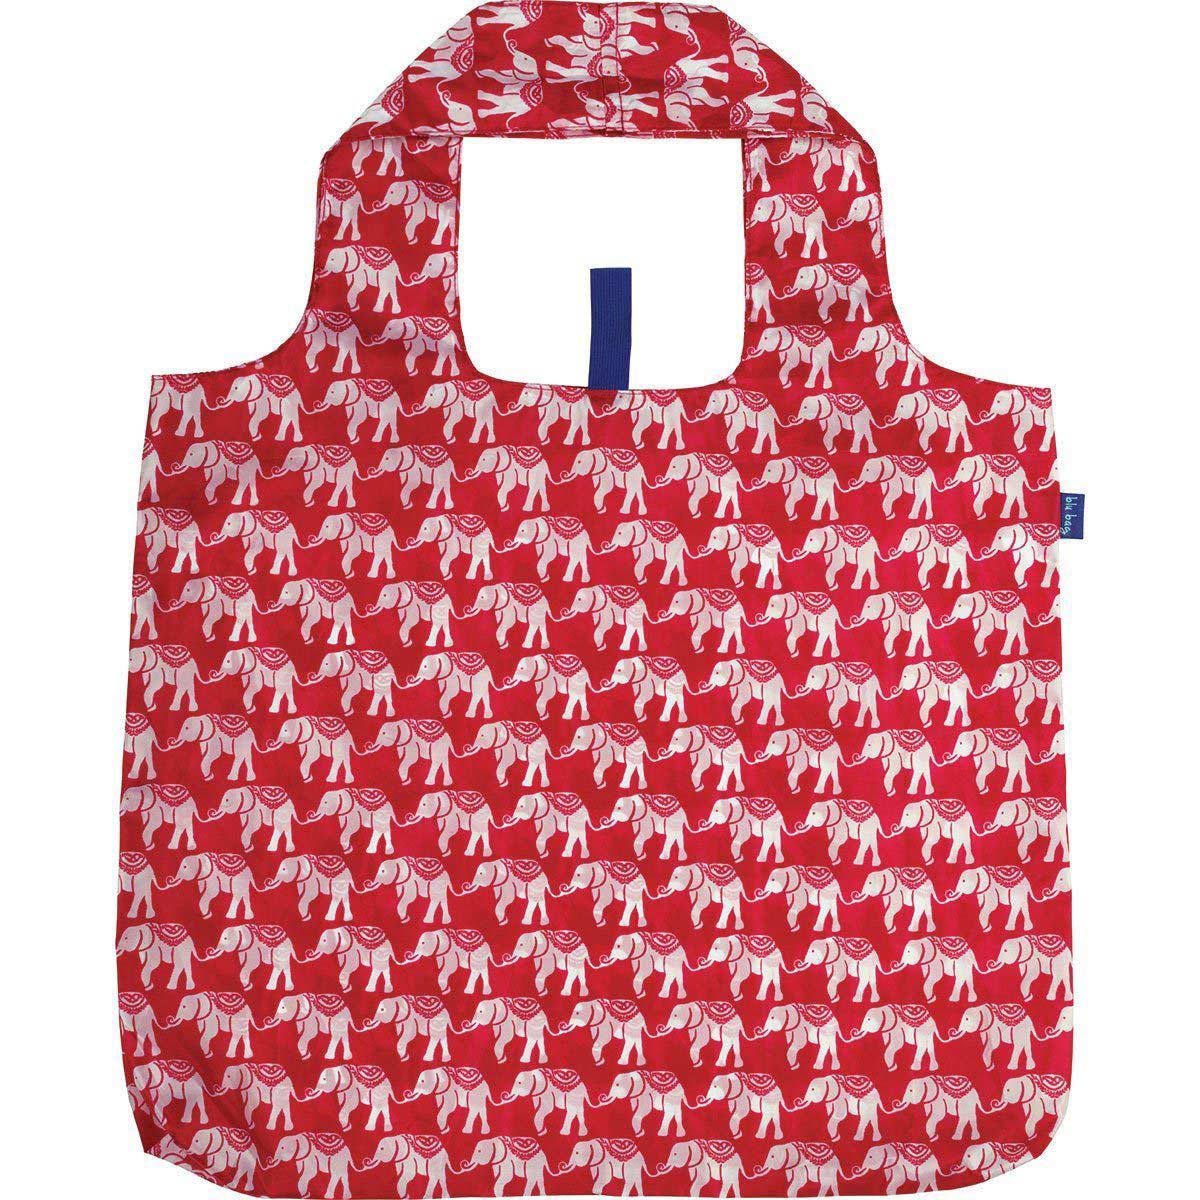 blu bag reusable shopping bag with red background and white elephant print